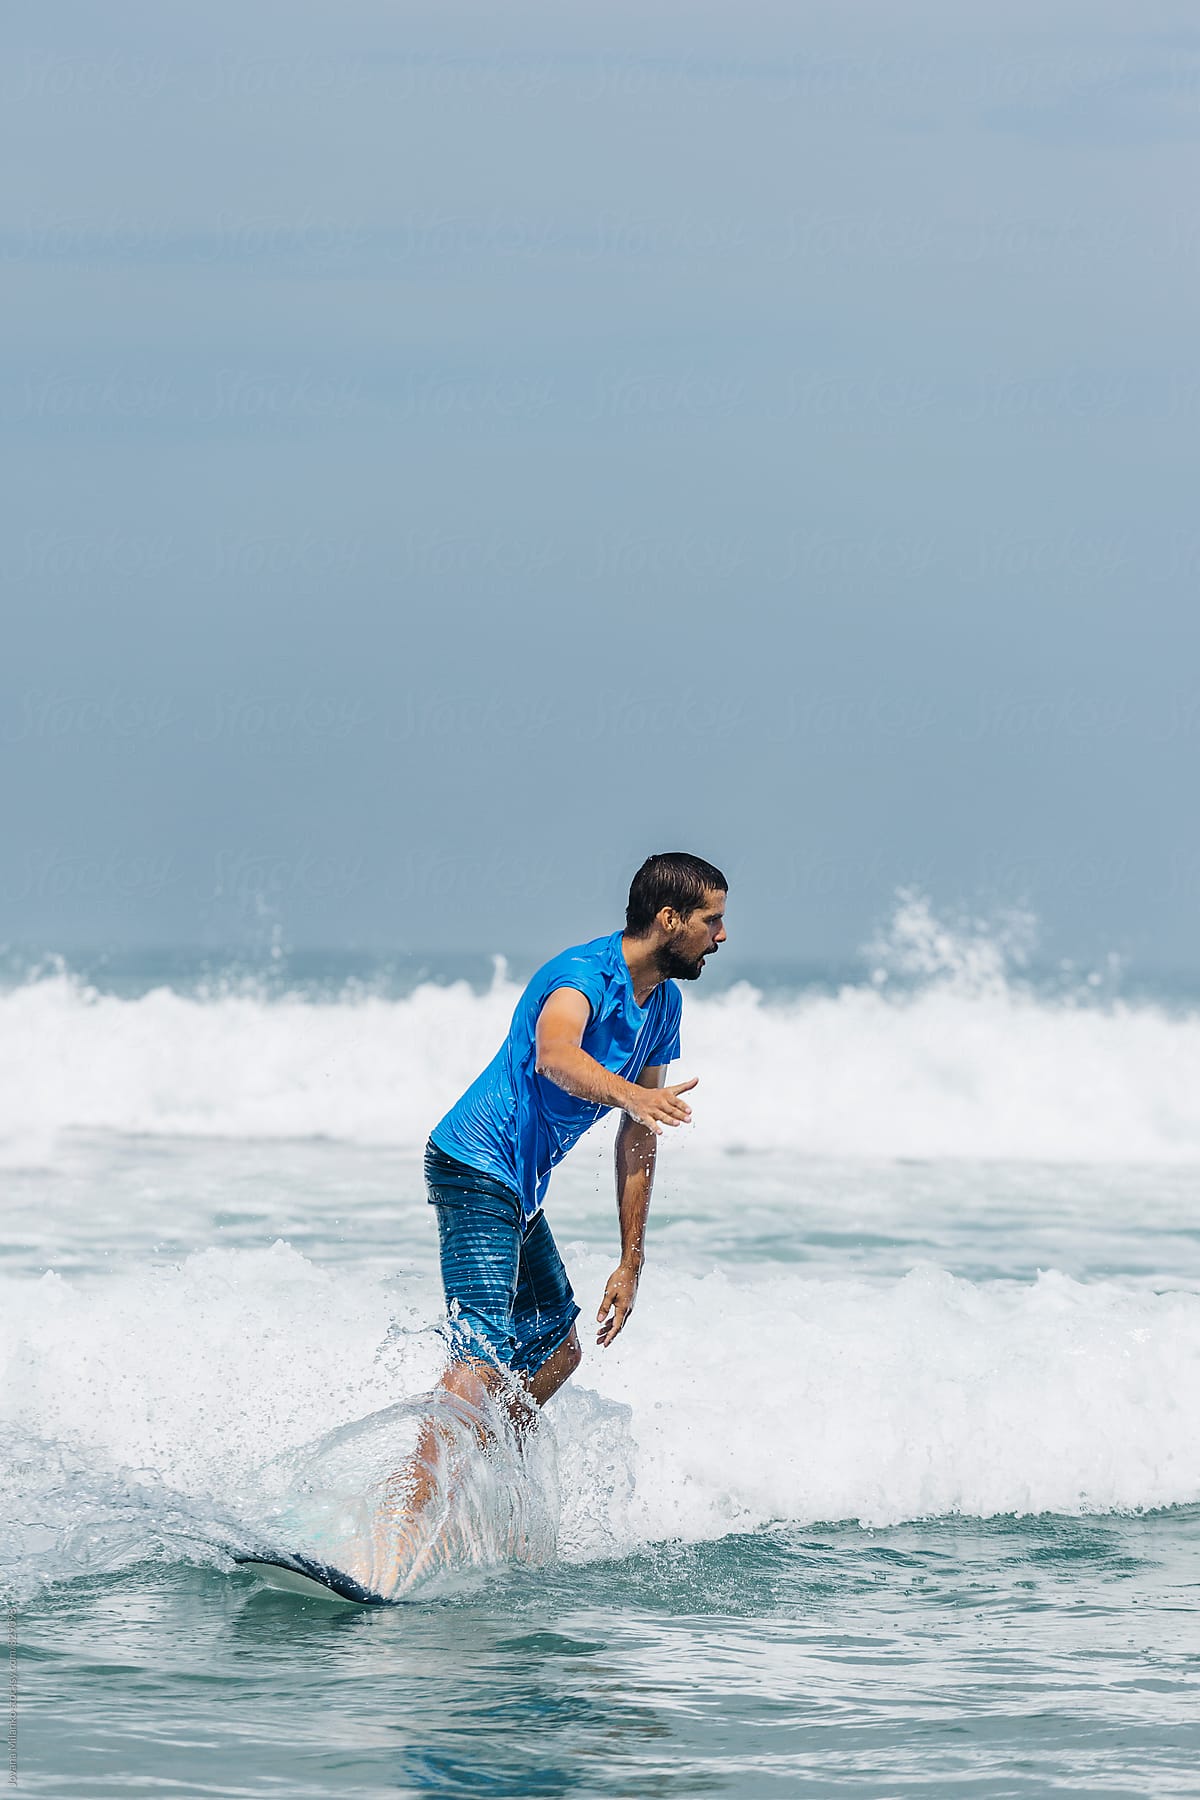 Young man learning to surf the waves on long surfboard